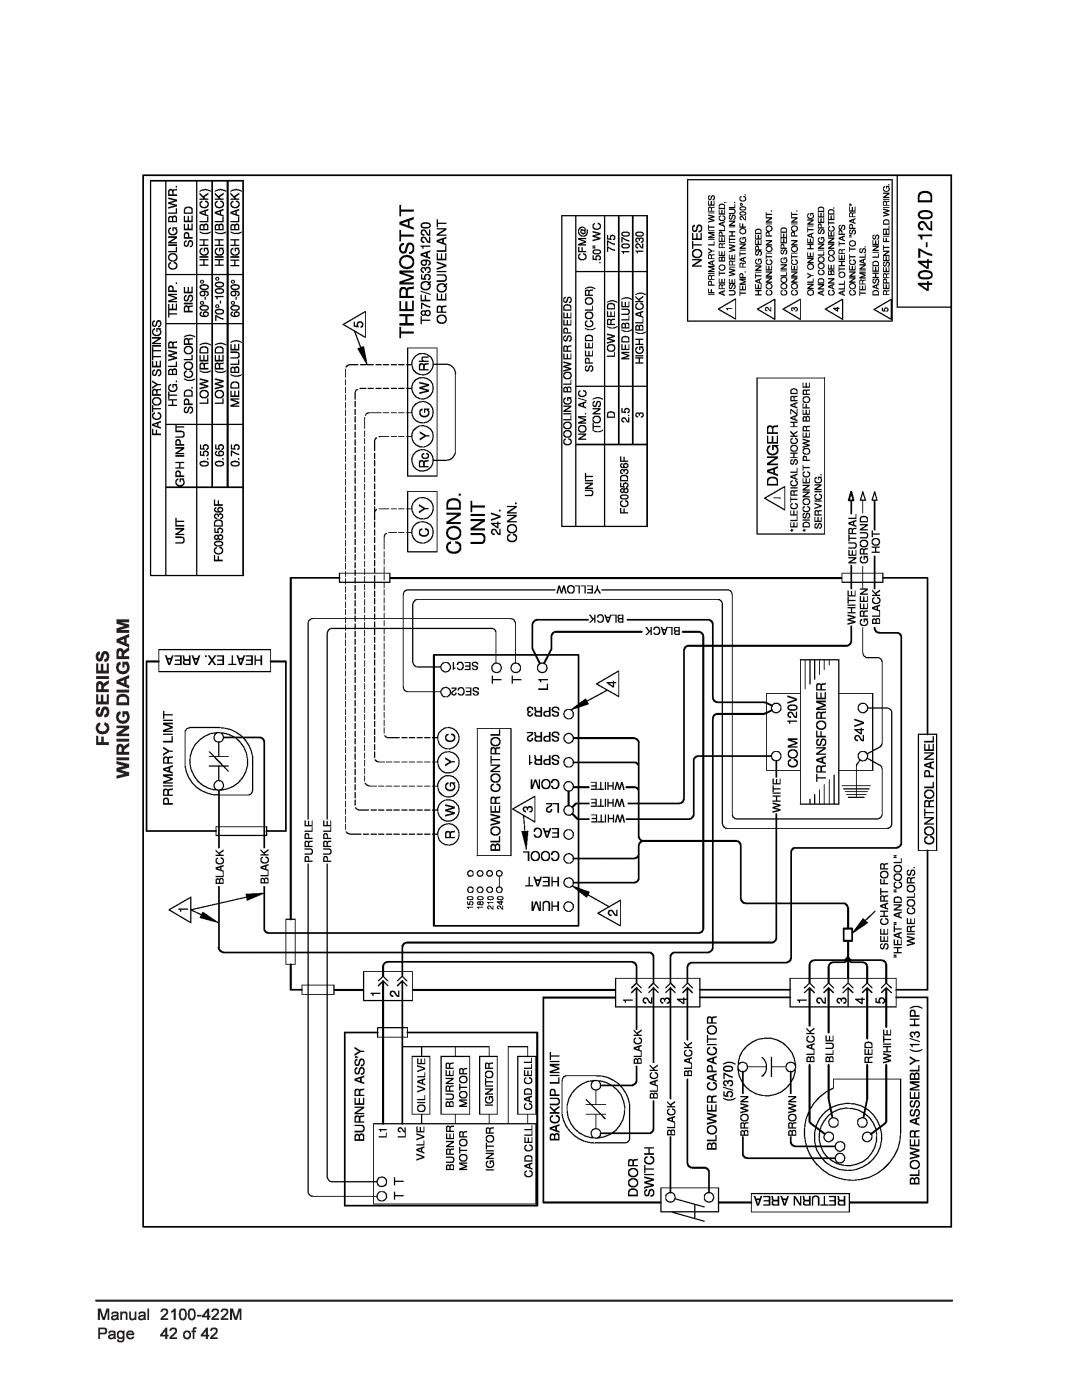 Bard FC085D36F, FLR140D60F, FLR110D48F, FLR085D36F, FH110D60F Unit, 4047-120D, Thermostat, Cond, Fc Series, Wiring Diagram 